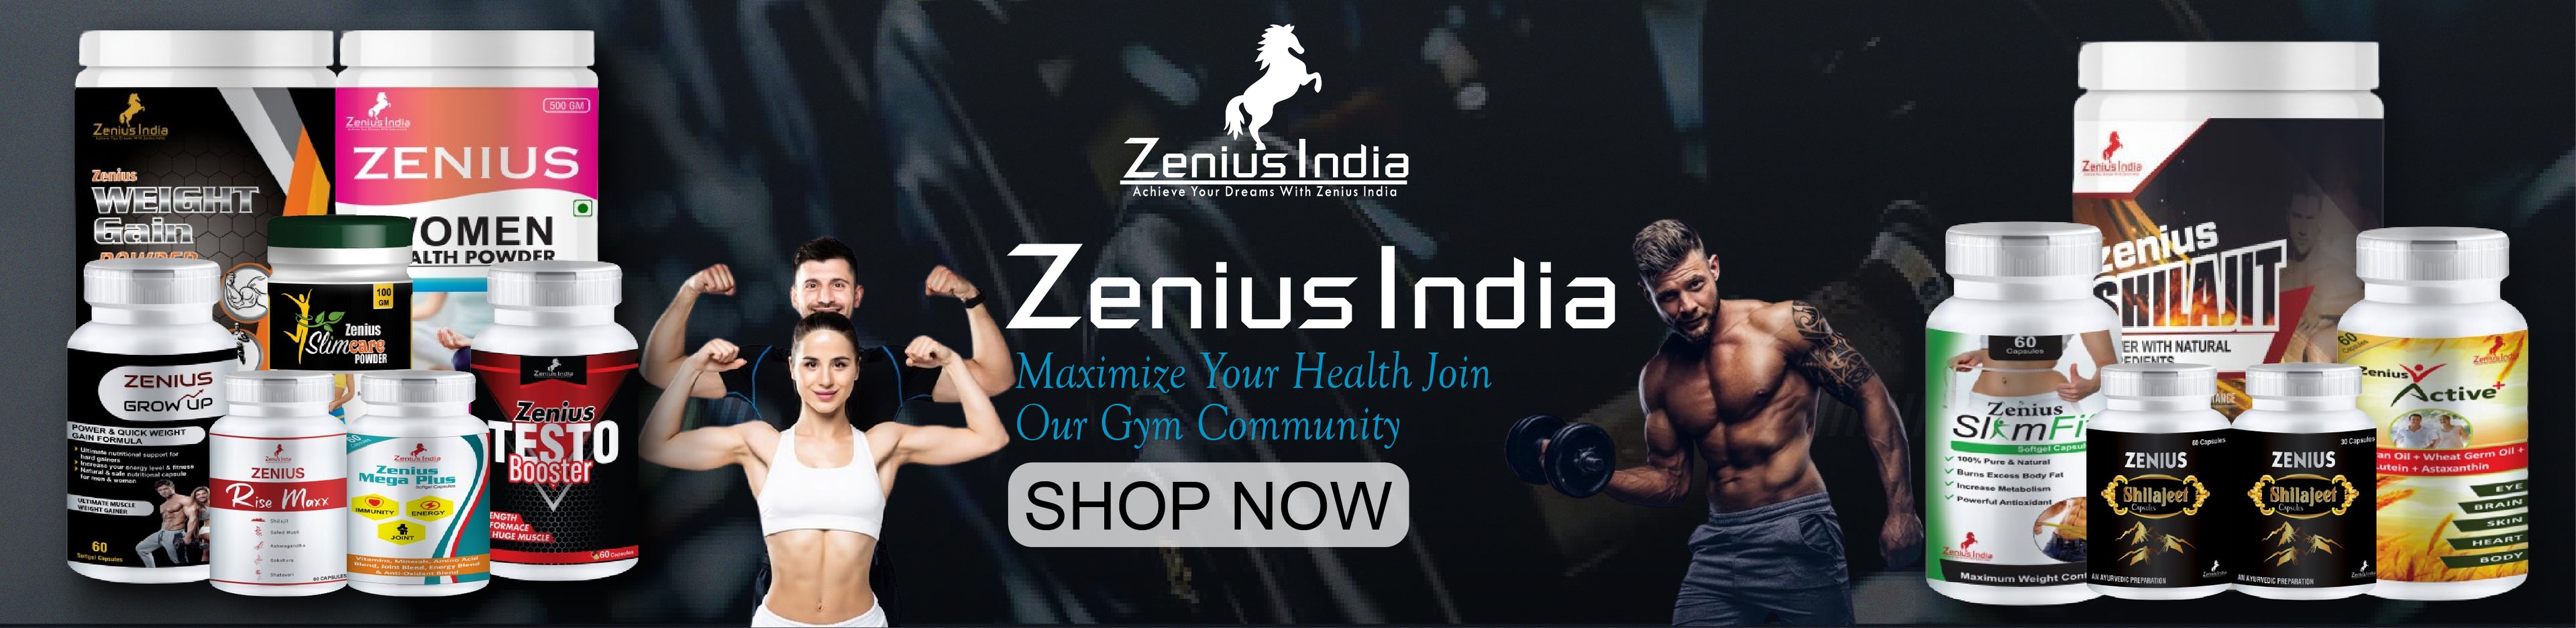 Health and wellness banner showcasing a variety of health-related products available on zeniusindia